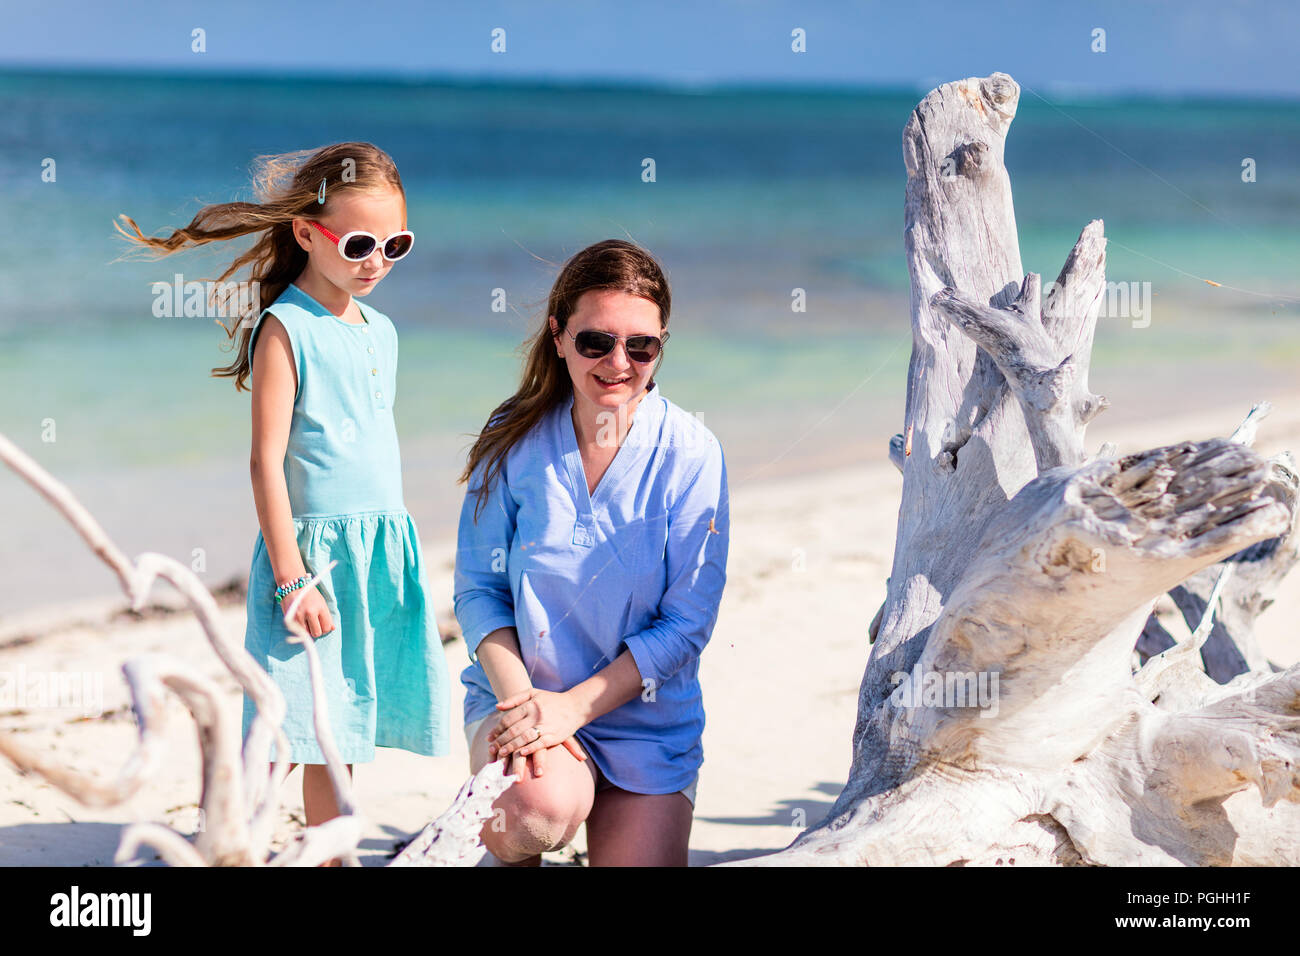 Mother and daughter enjoying tropical beach vacation Stock Photo